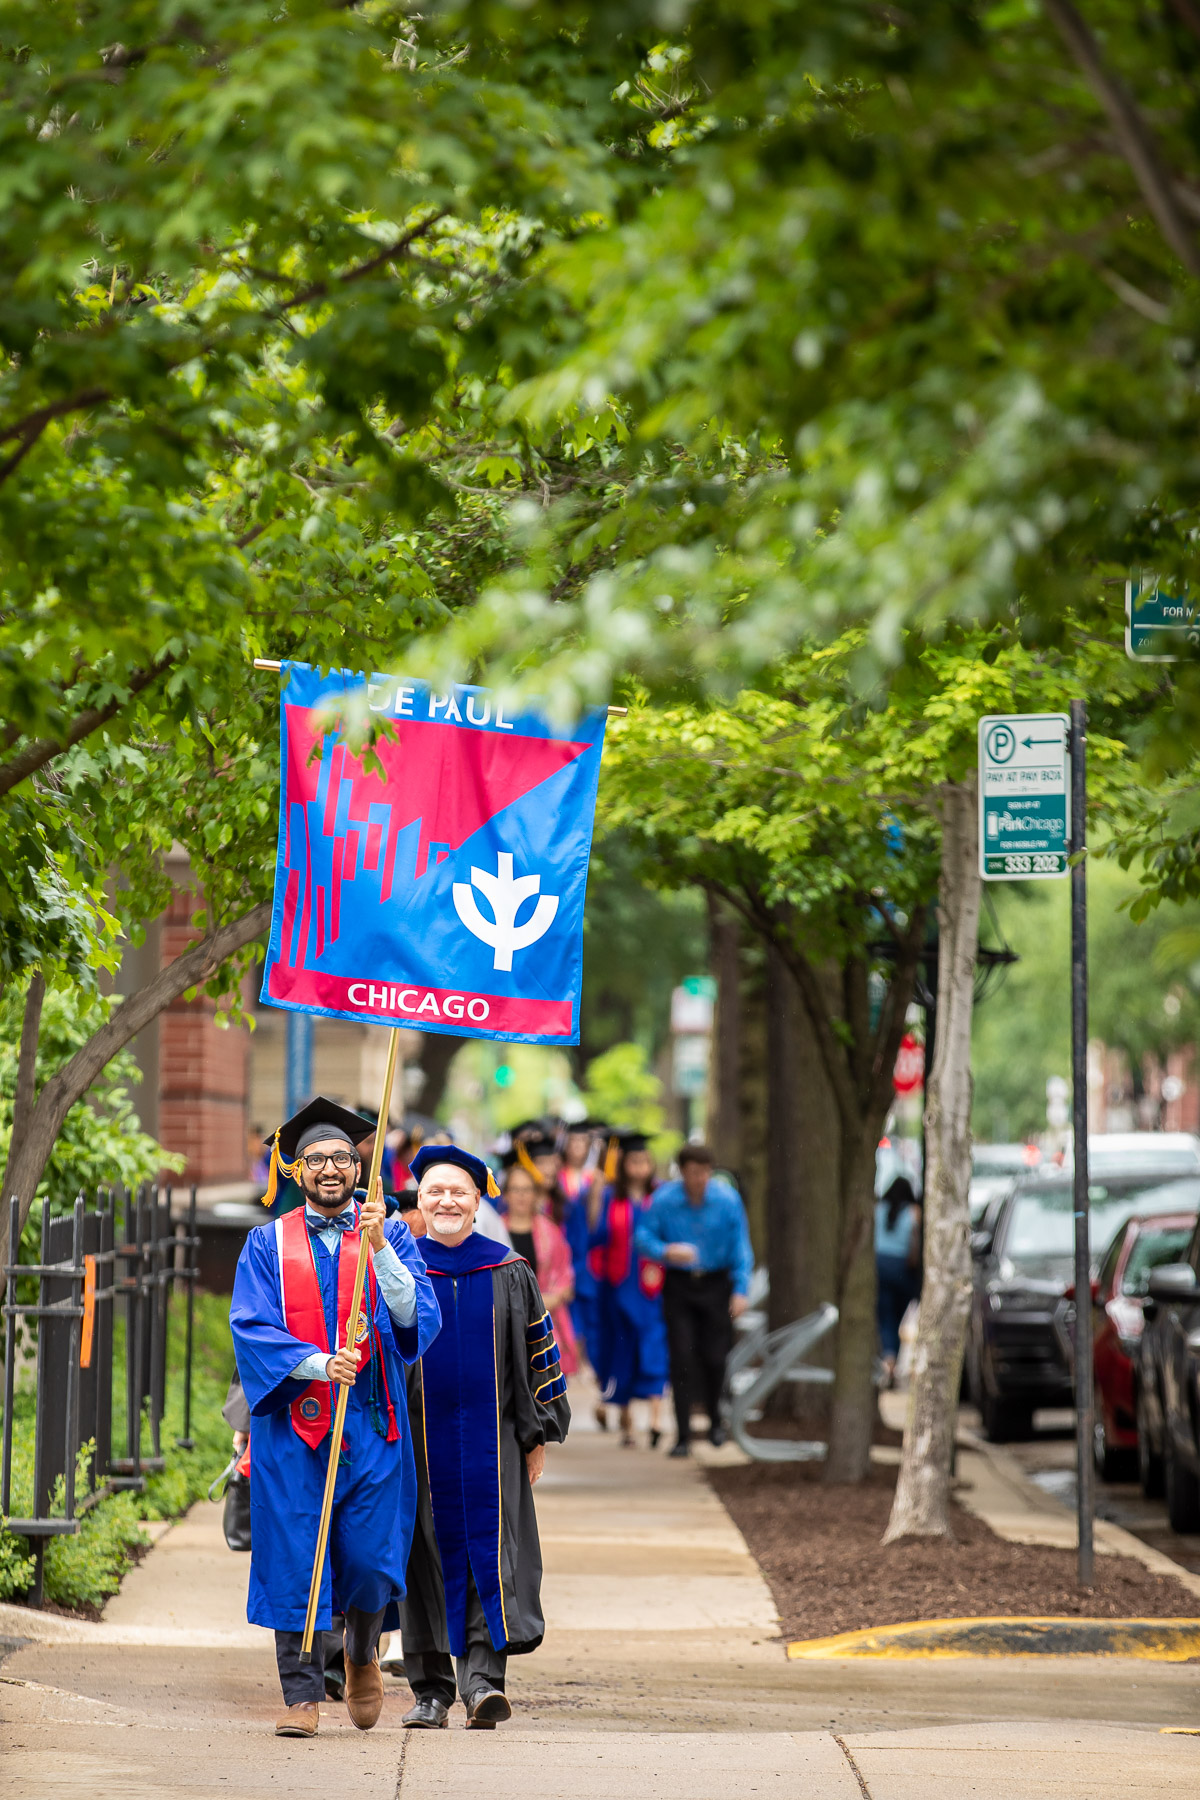 DePaul’s annual Baccalaureate Mass, Friday, June 10, in St. Vincent de Paul Church, marked the traditional start of DePaul University’s 123rd commencement weekend celebration.